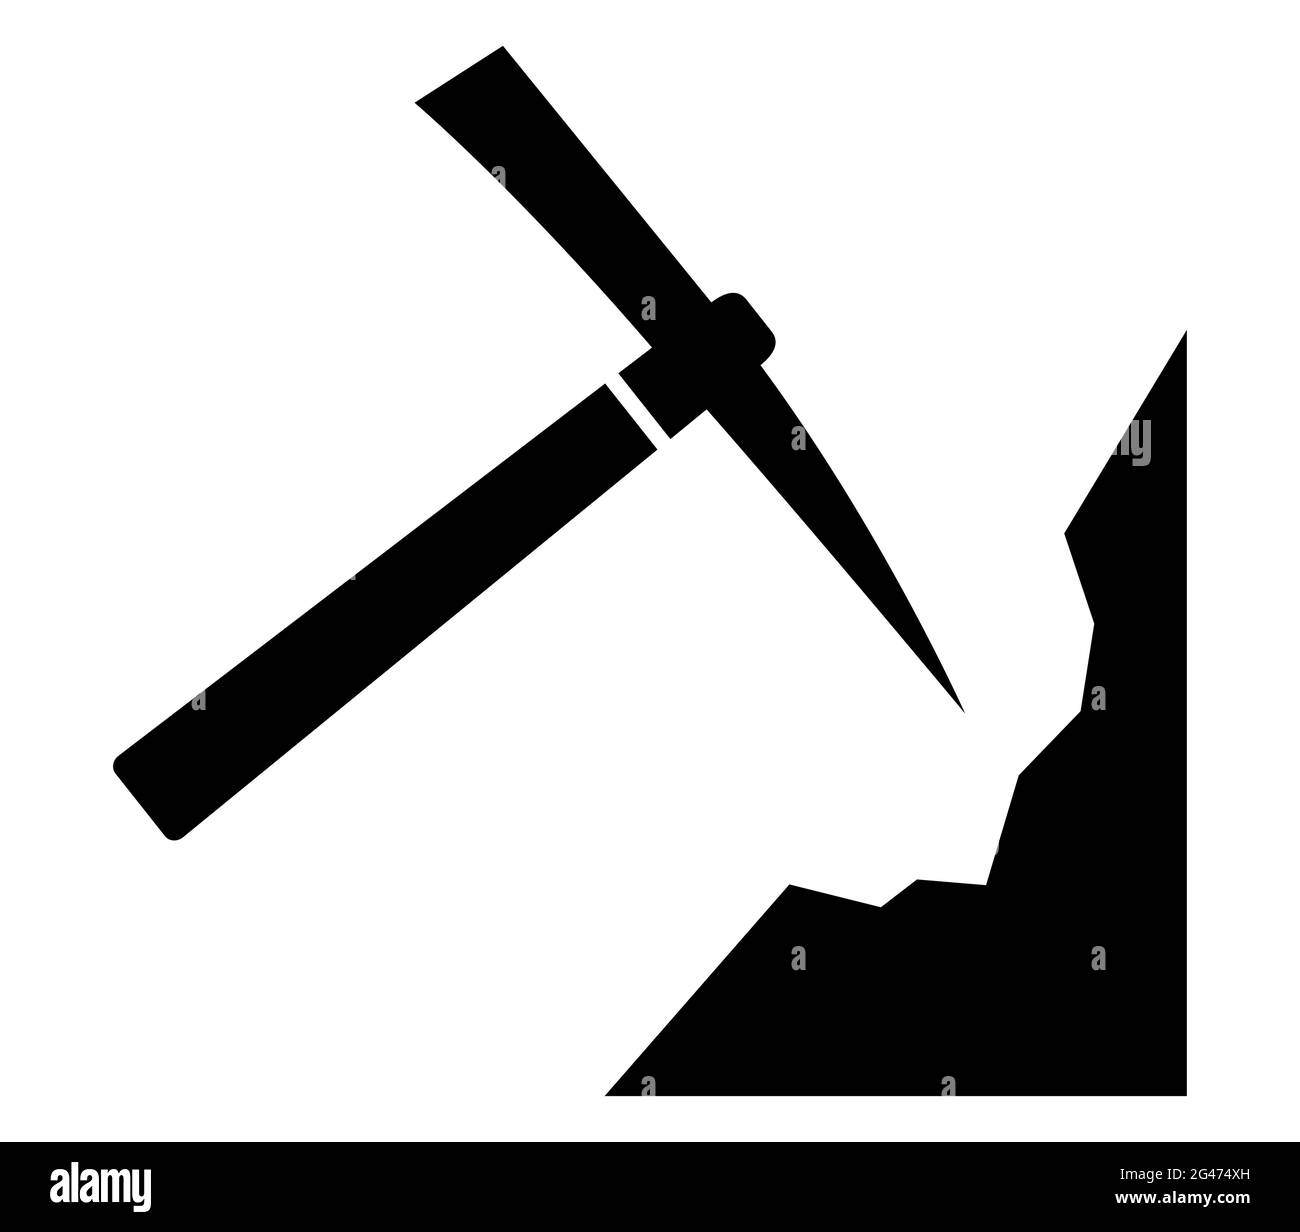 Miner pickaxe tool for mining work hitting rocks vector icon Stock Vector